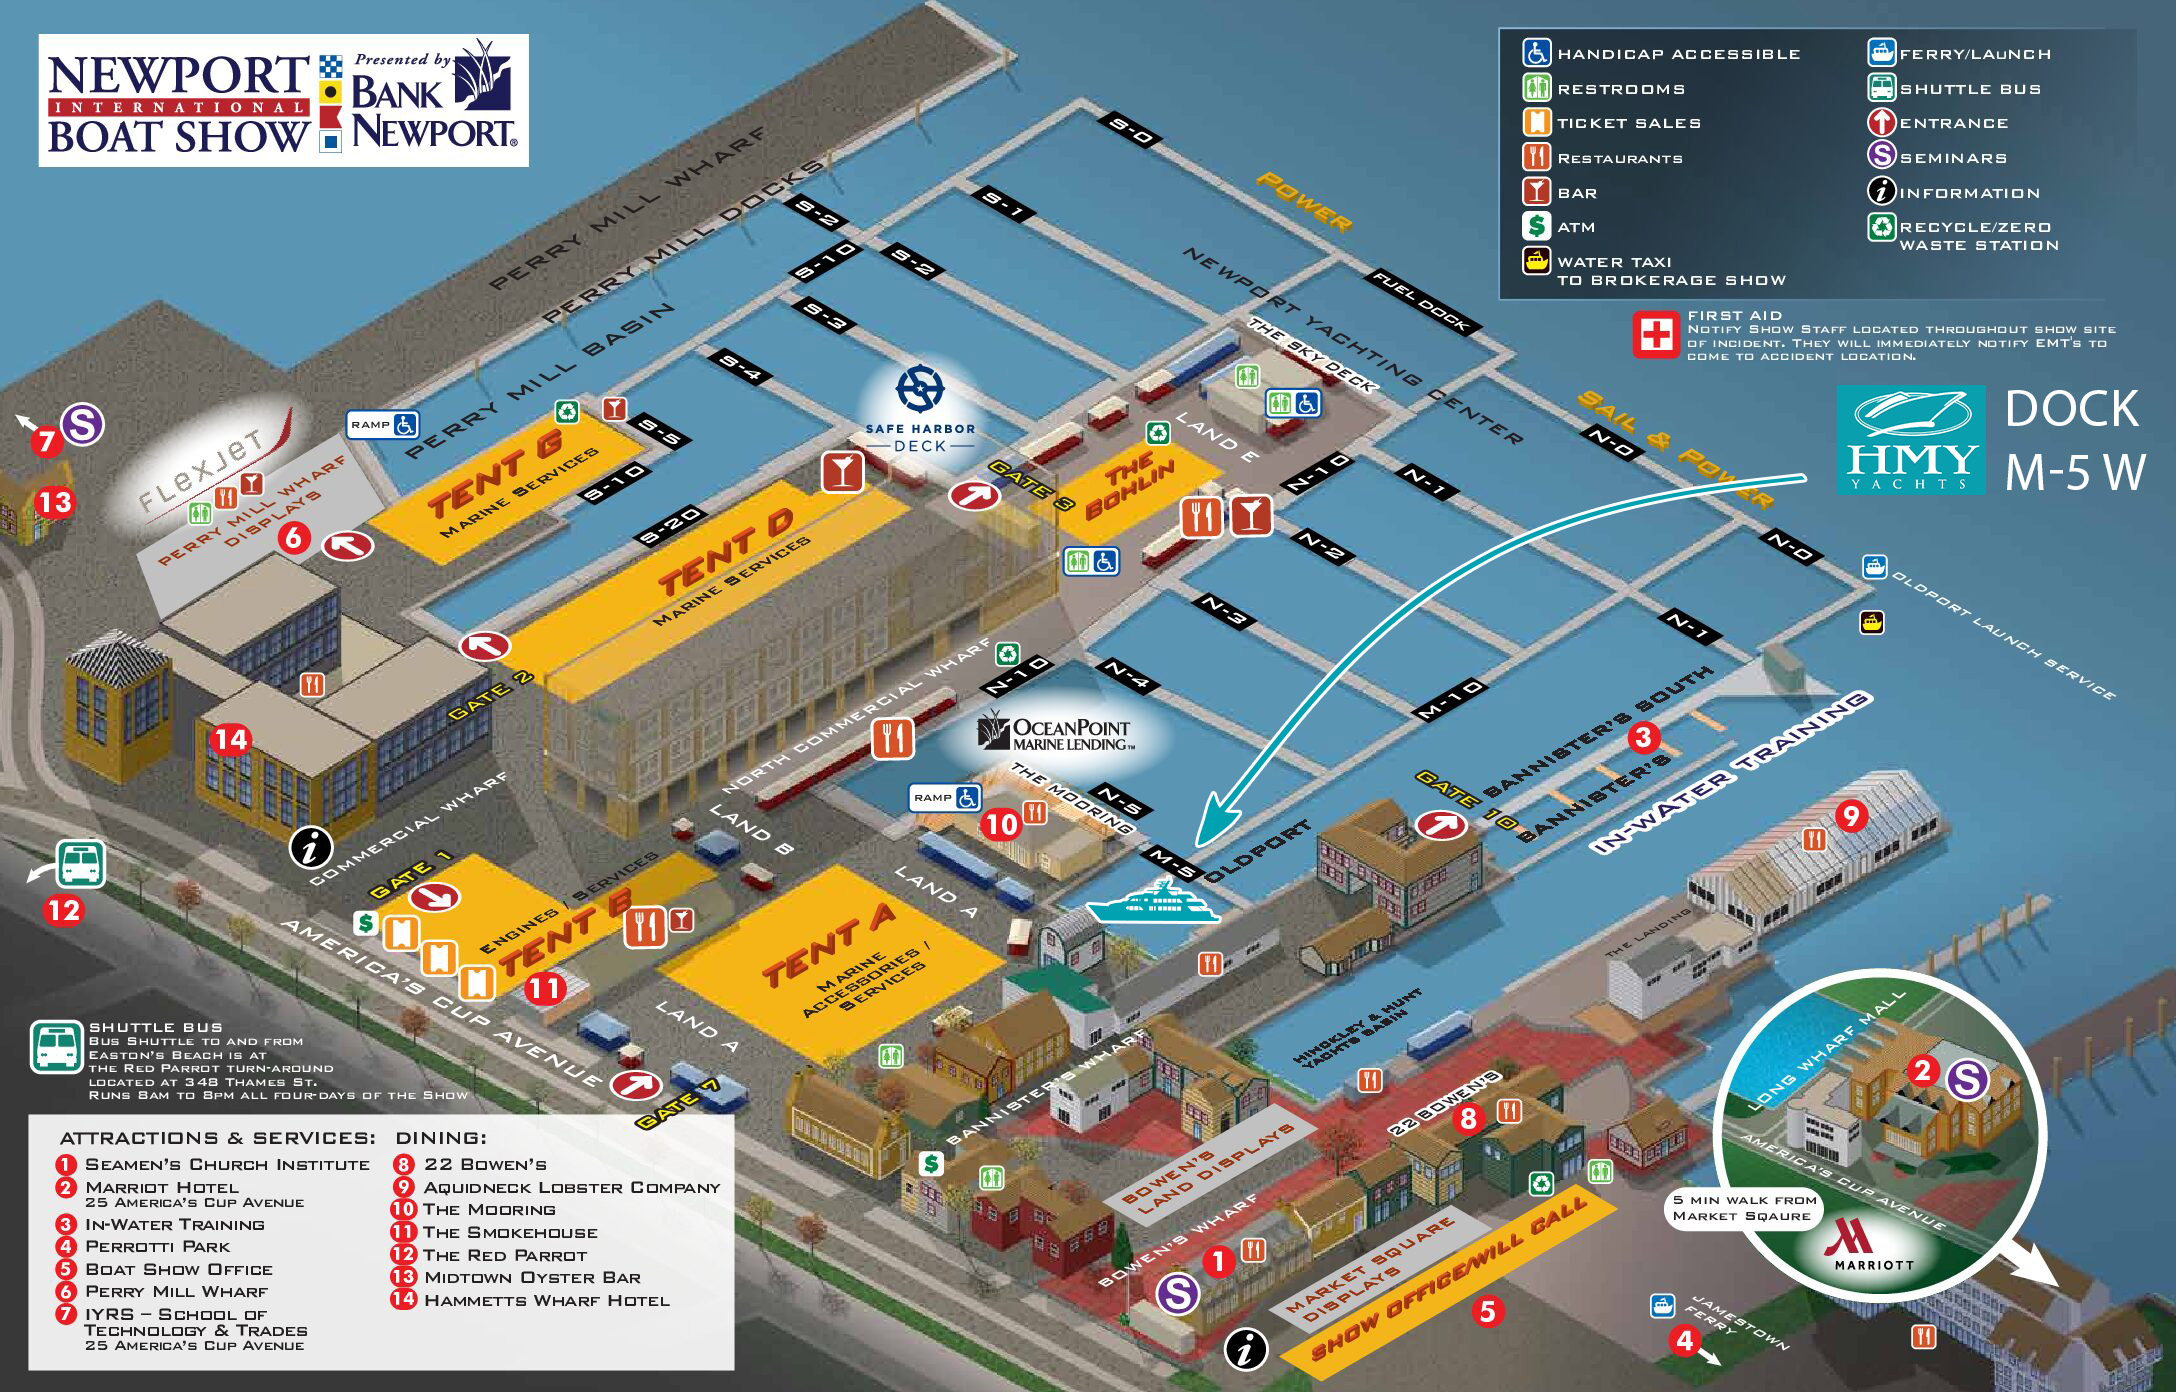 A map showing the Newport International Boat Show and where HMY is located.